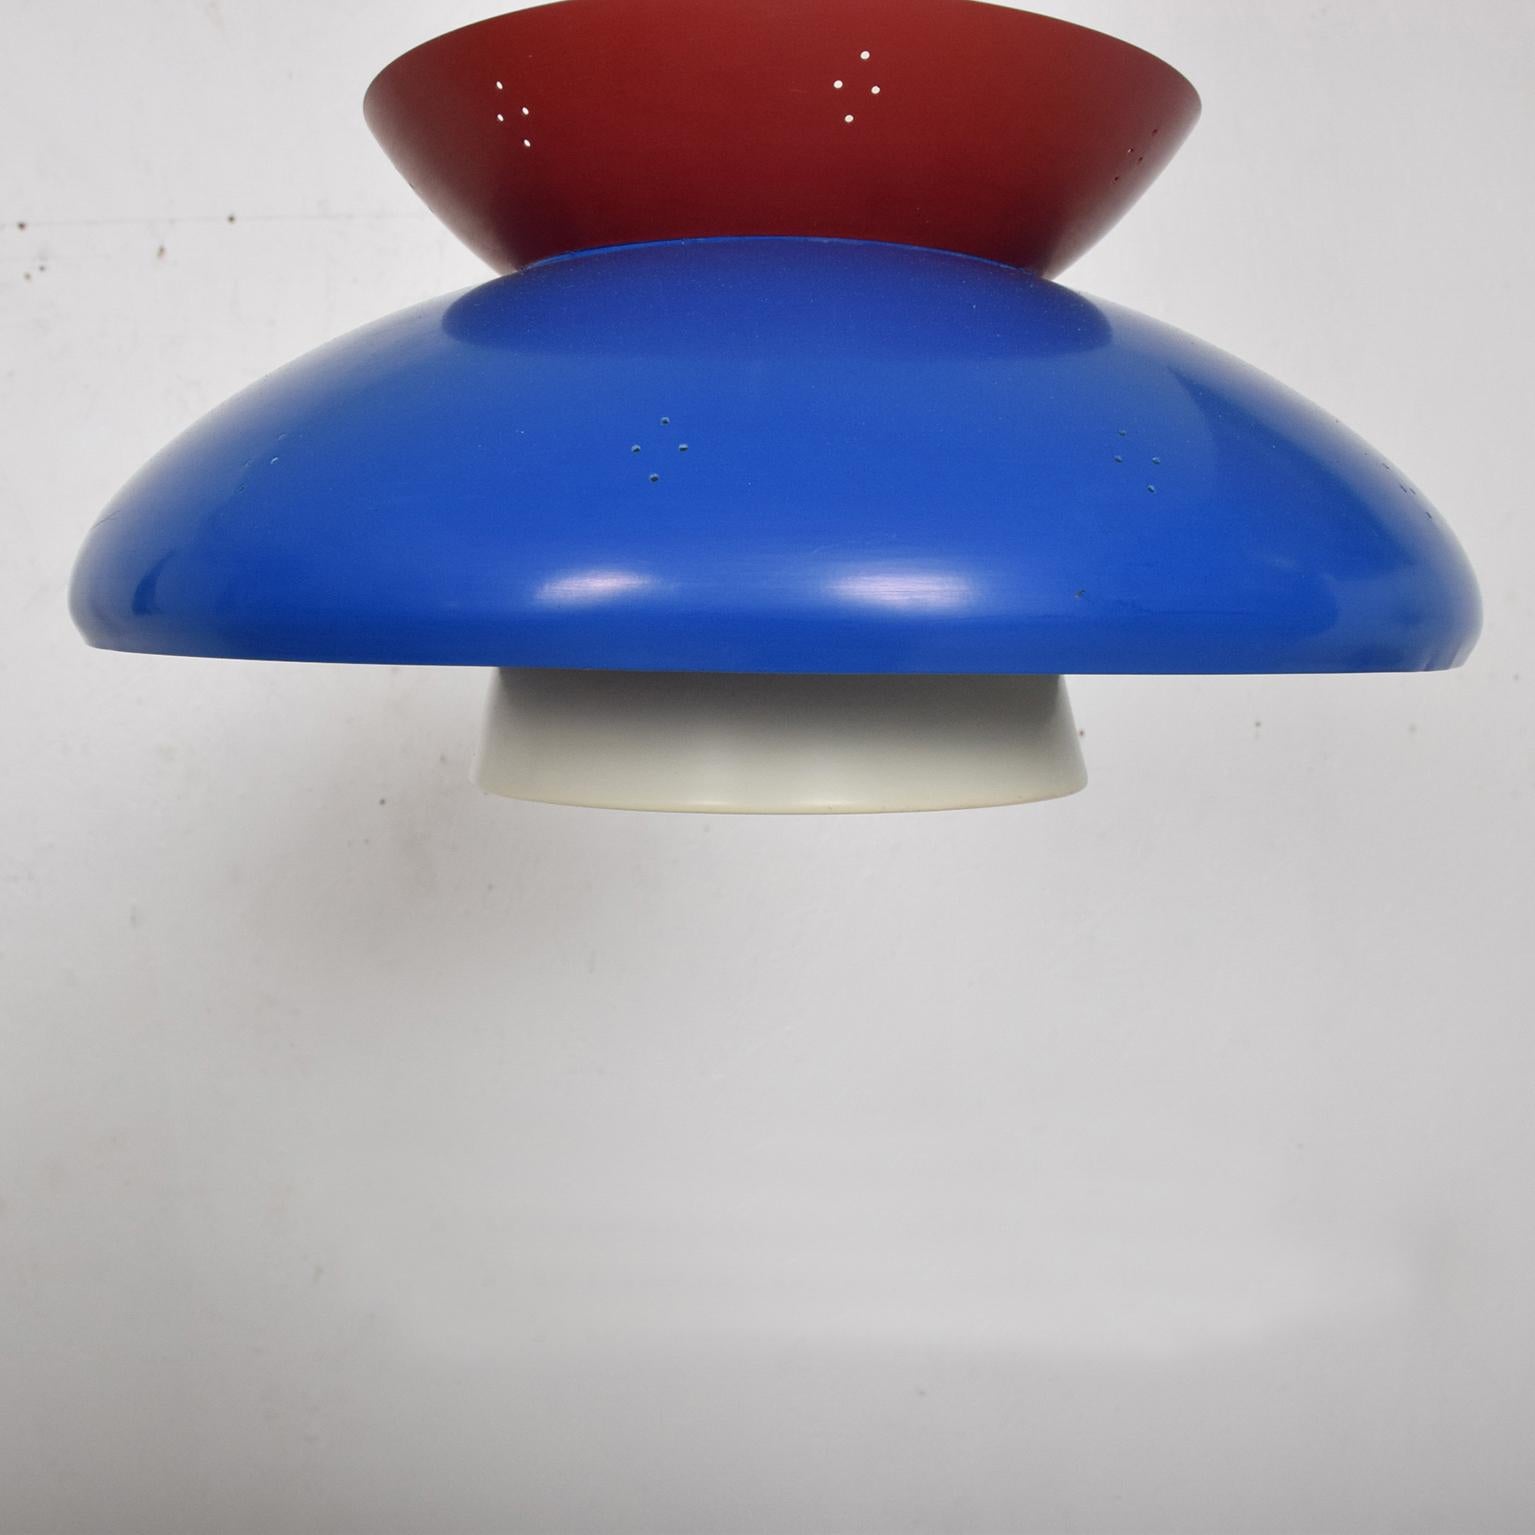 Metal 1950s USA Patriotic Pendant Light Mid-Century Modern Red White and Blue Lamp